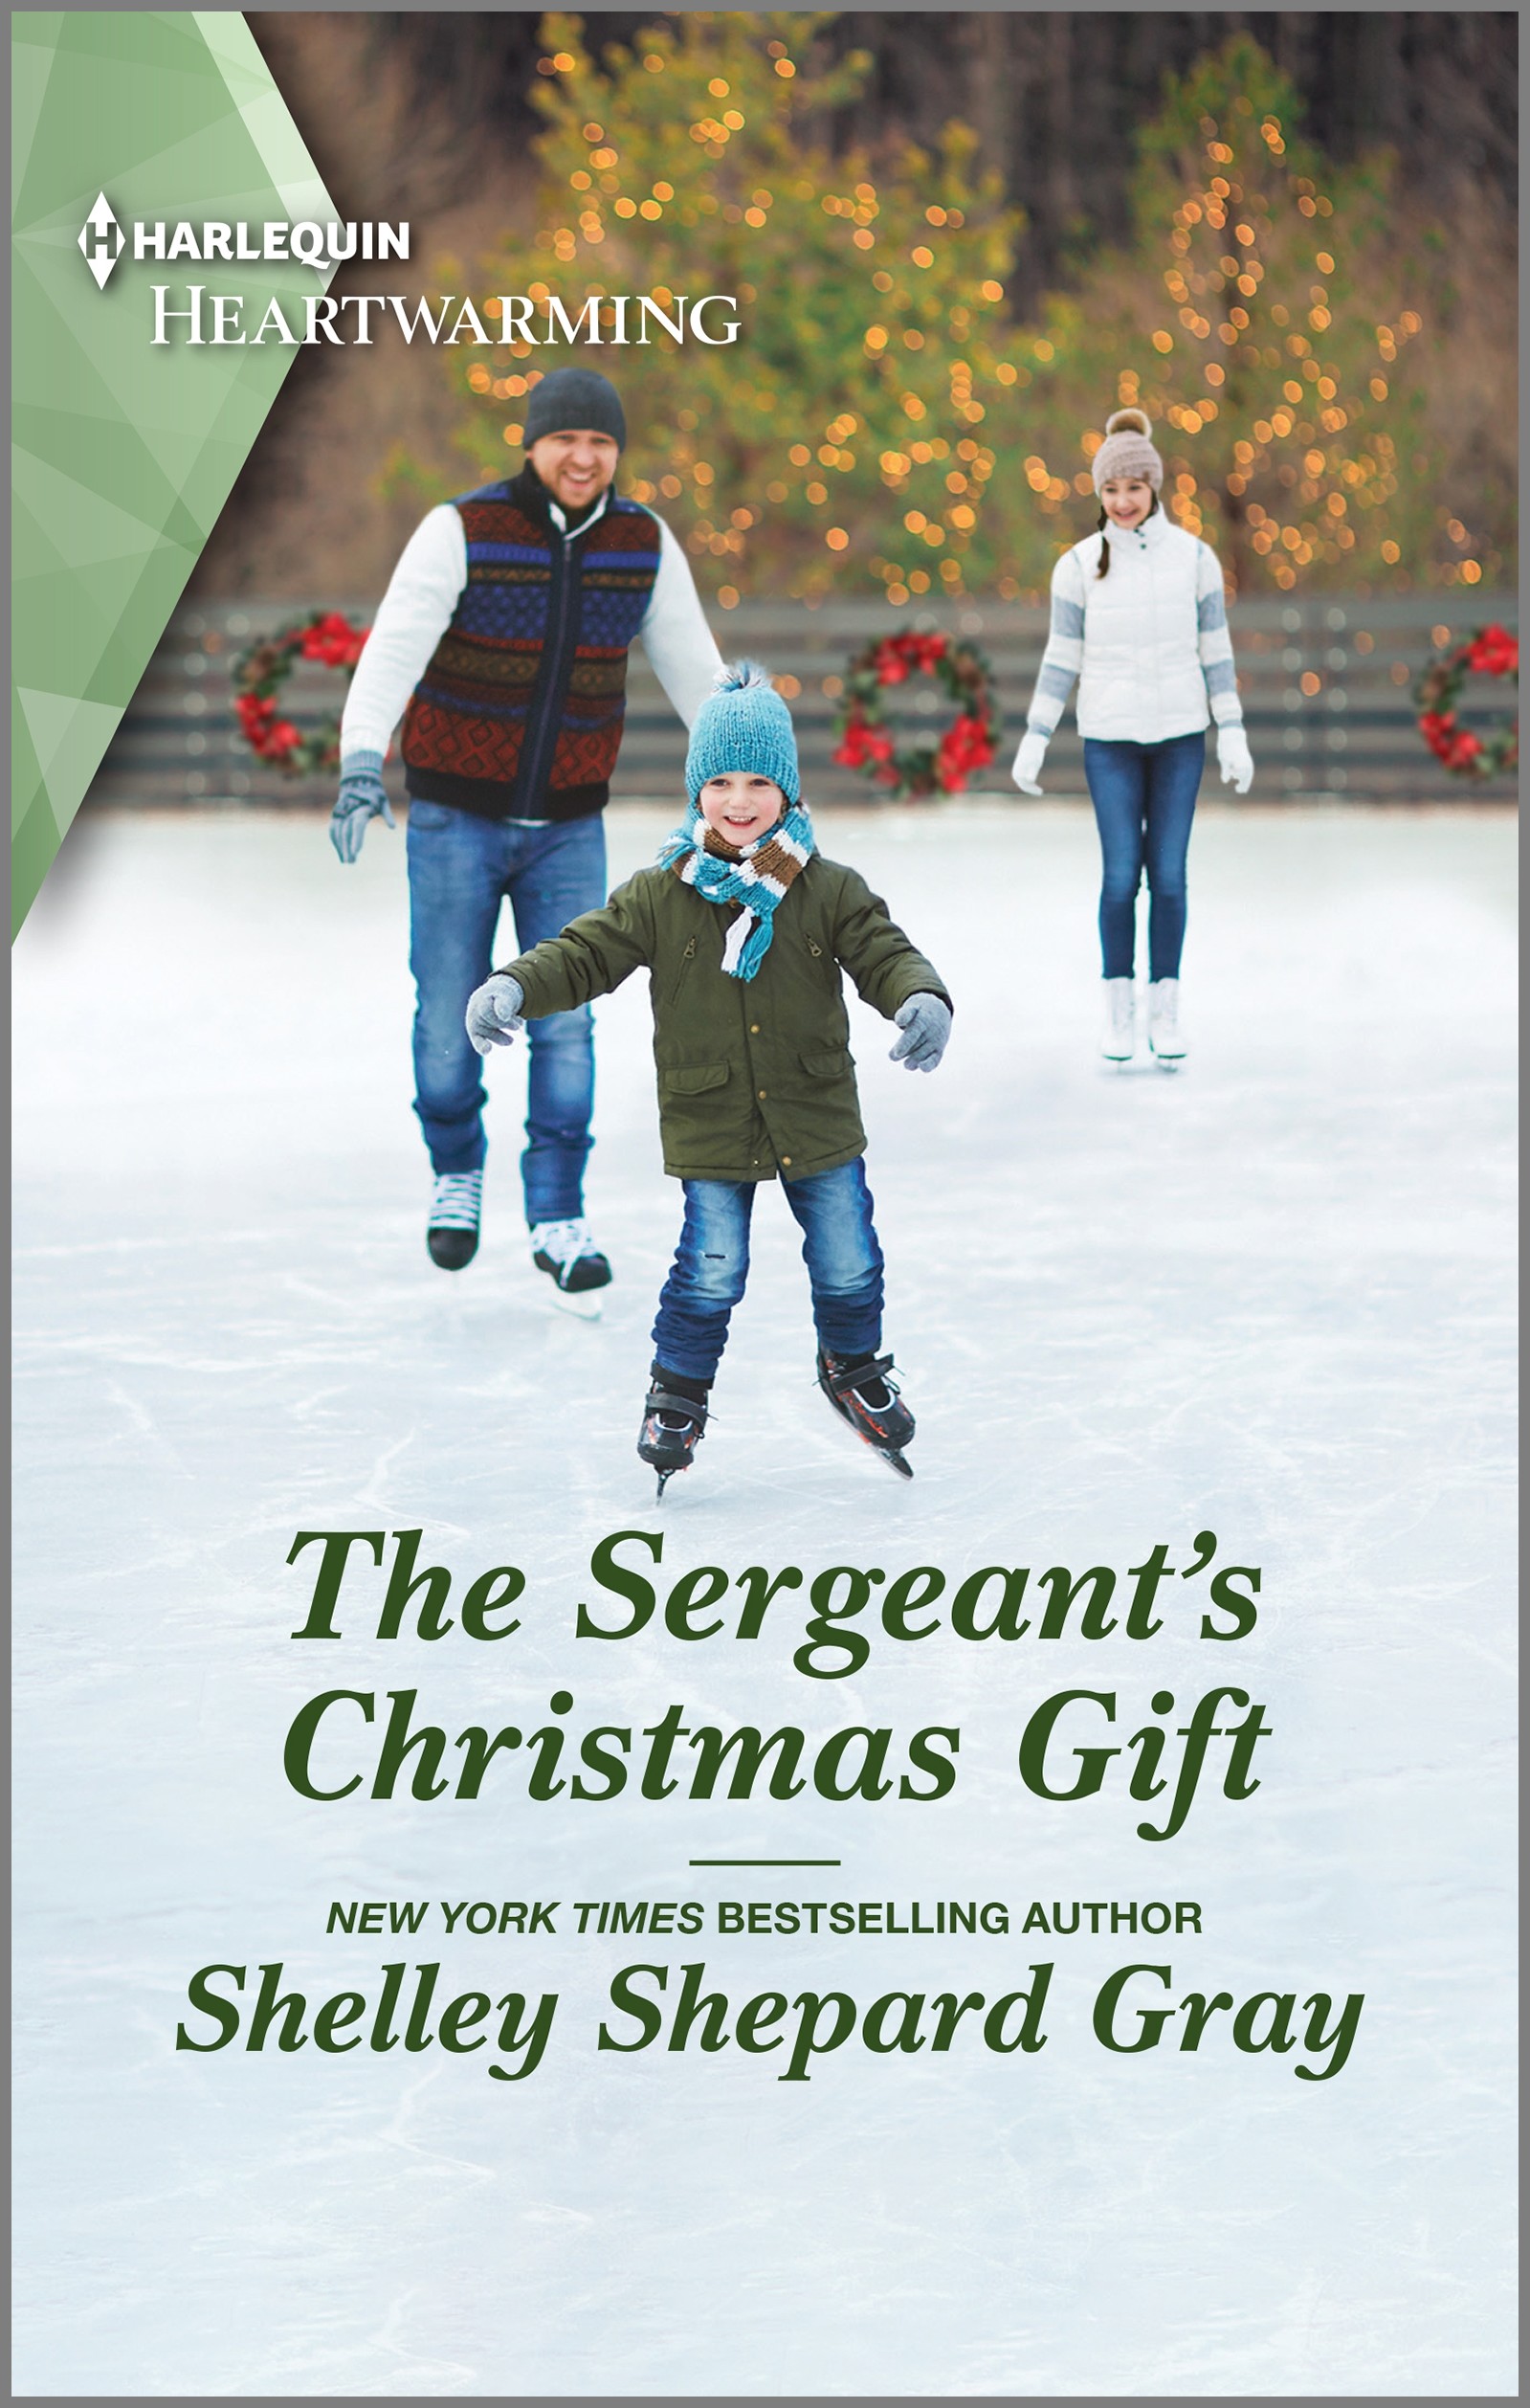 THE SERGEANT'S CHRISTMAS HOMECOMING by Shelley Shepard Gray